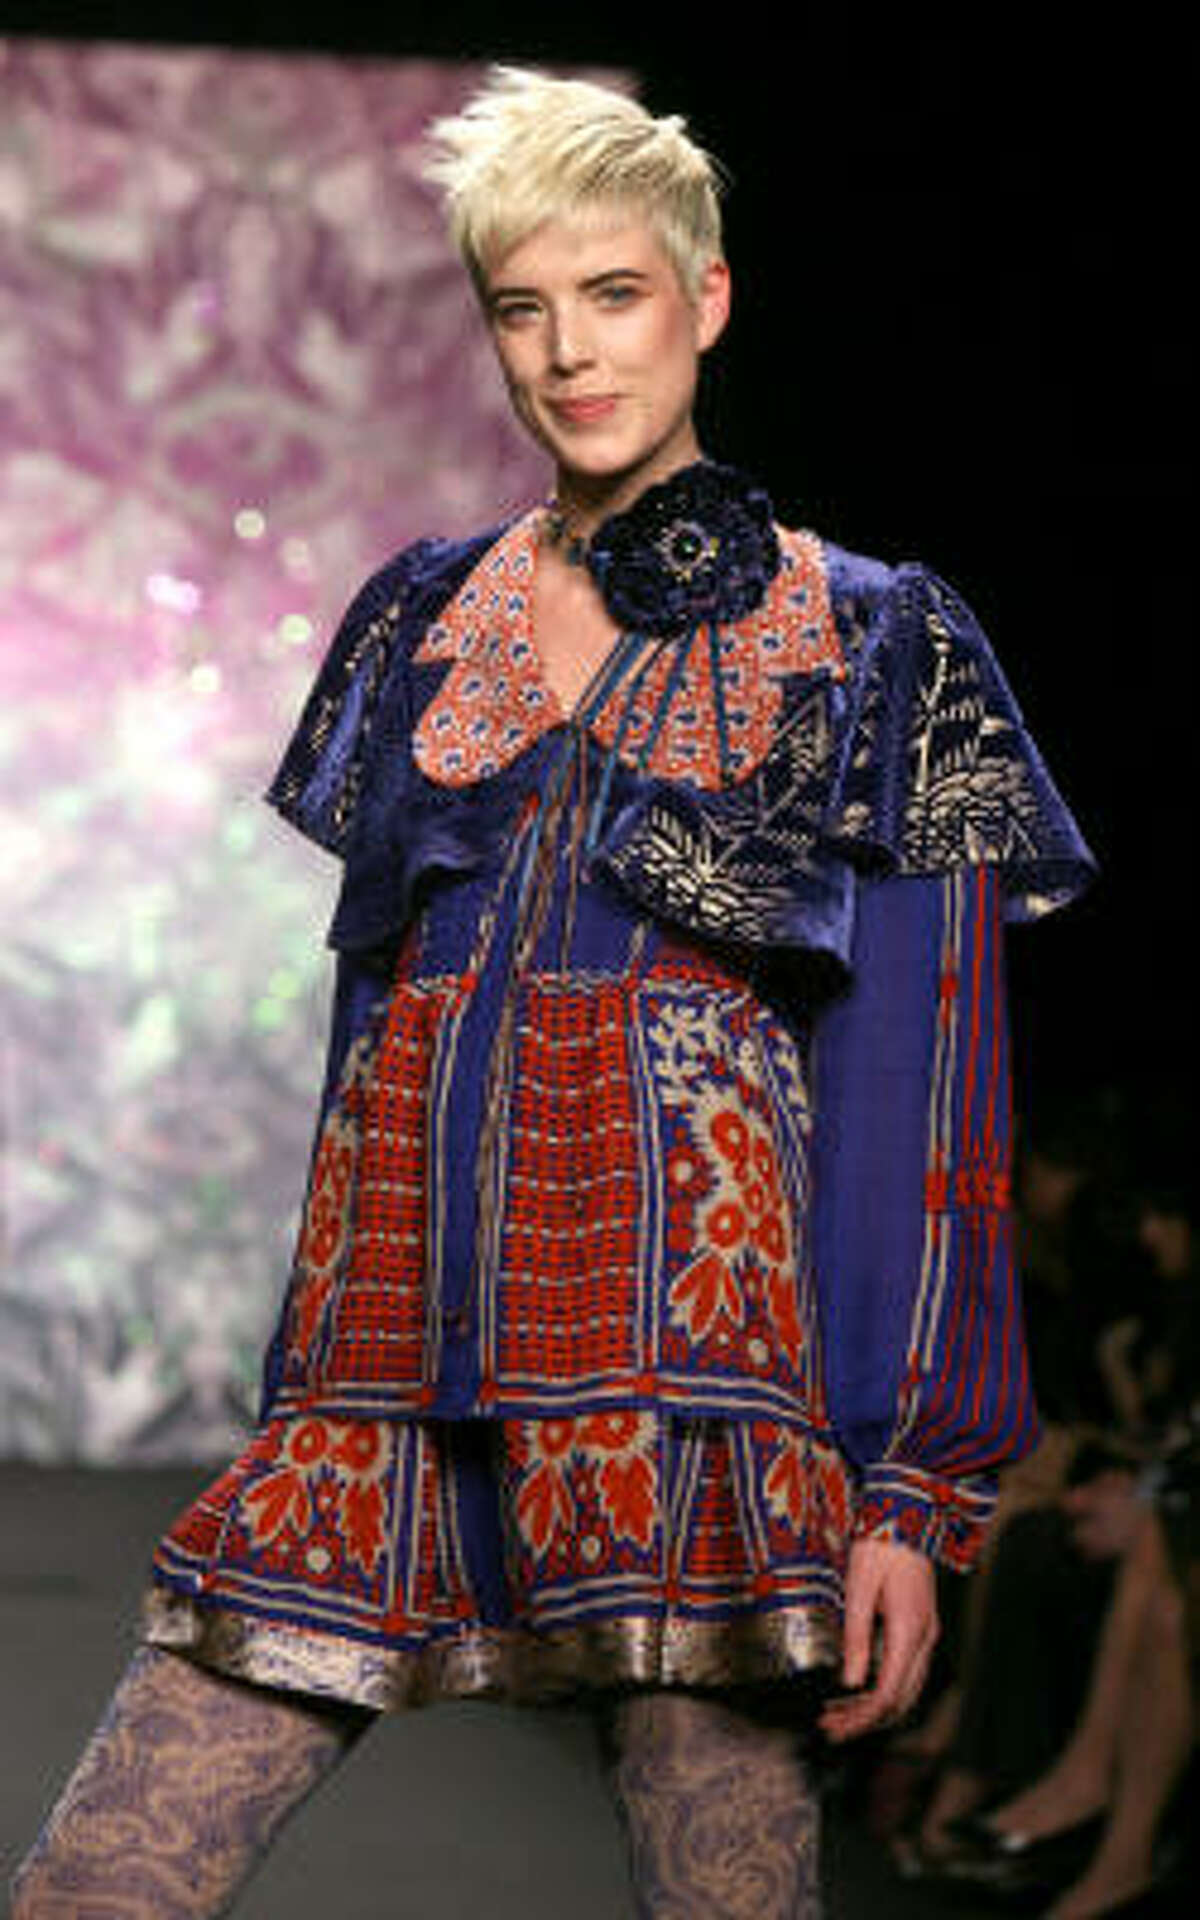 The fall 2008 collection of Anna Sui is modeled during Fashion Week in New York, Wednesday, Feb. 6, 2008.